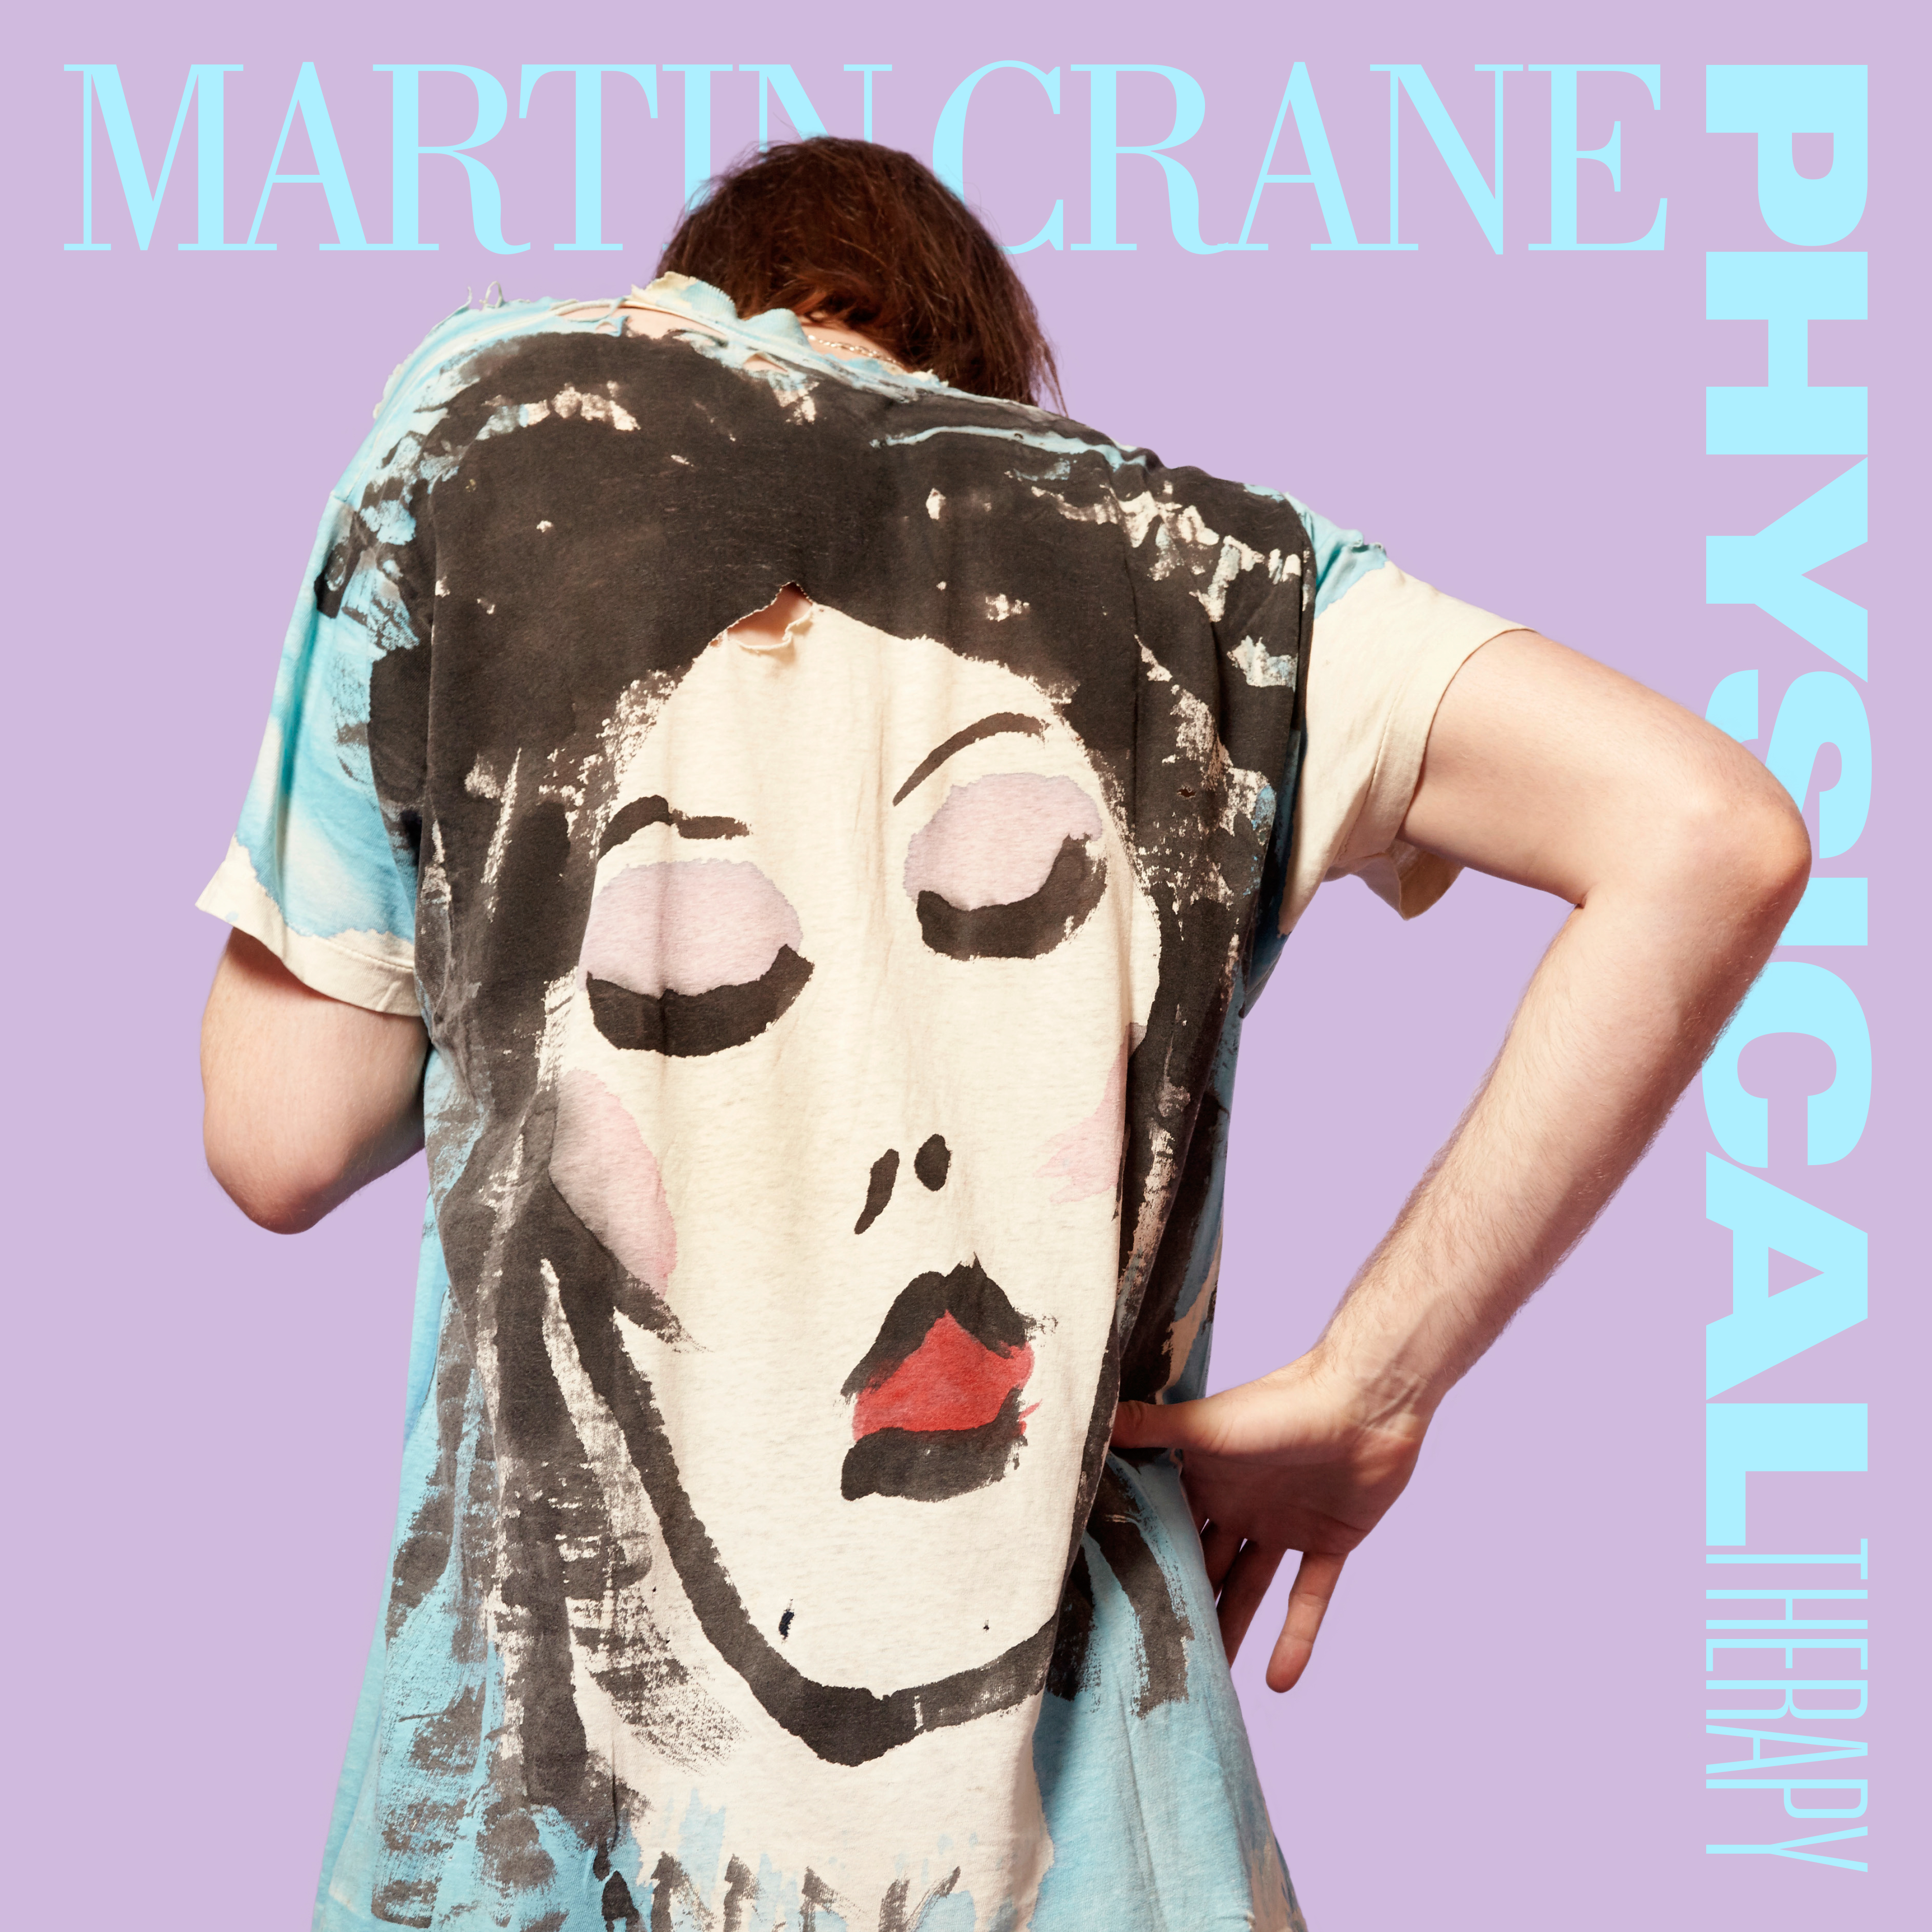 Martin Crane of Brazos has shared the single "Physical Therapy",